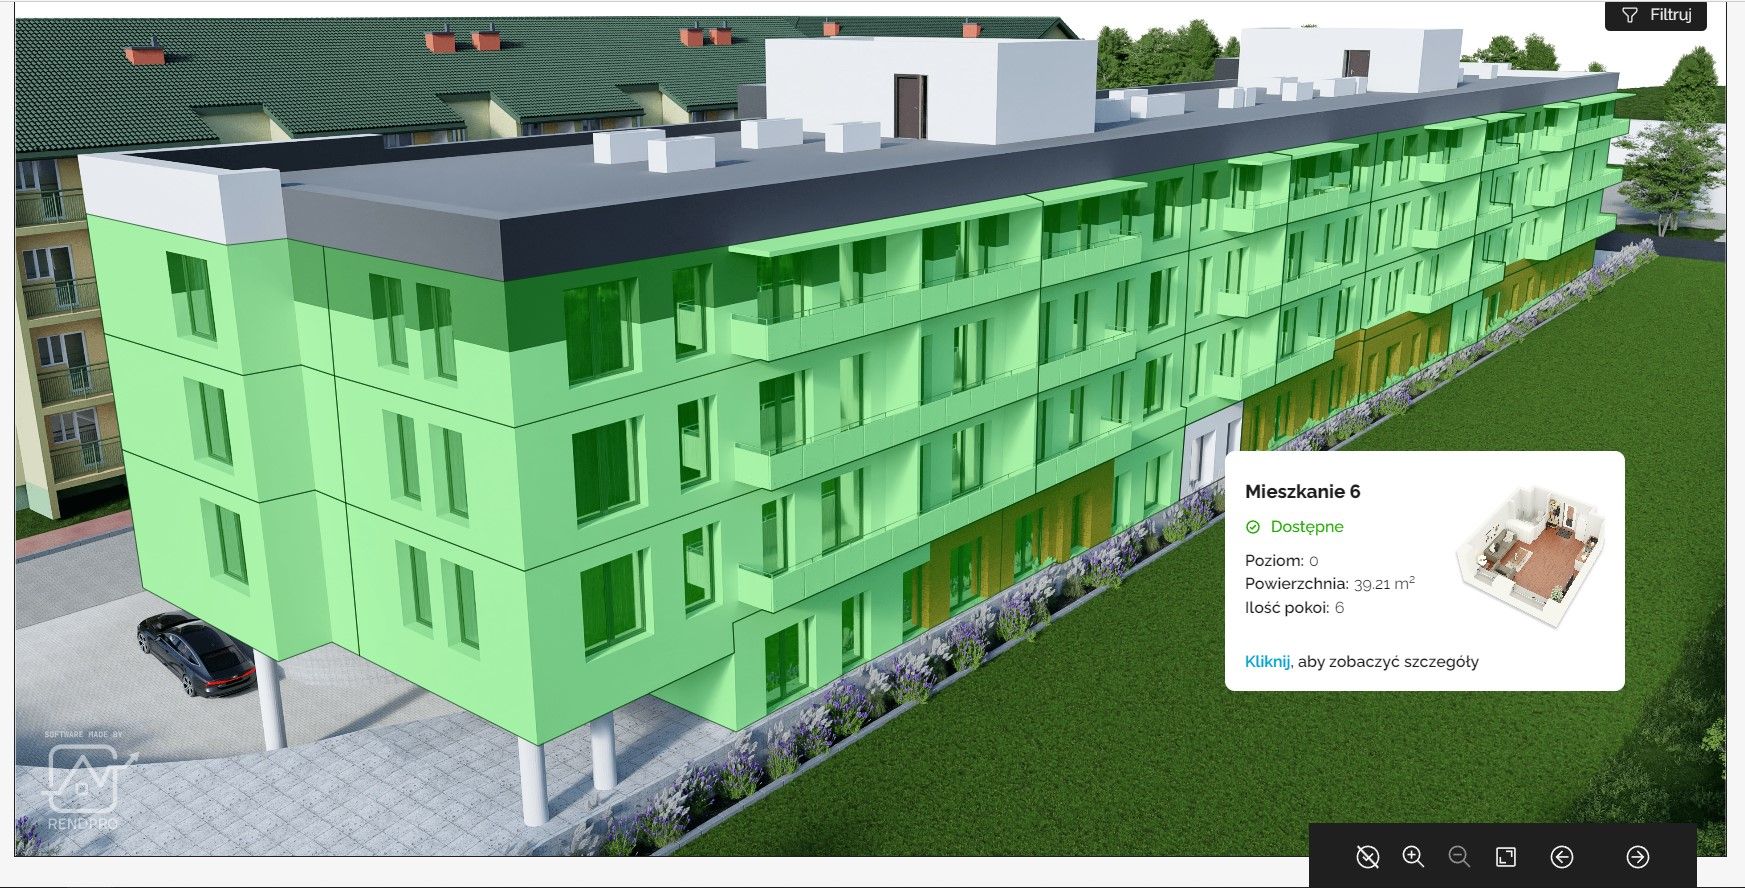 interactive-view-of-apartments-on-the-investment-page-5.jpg